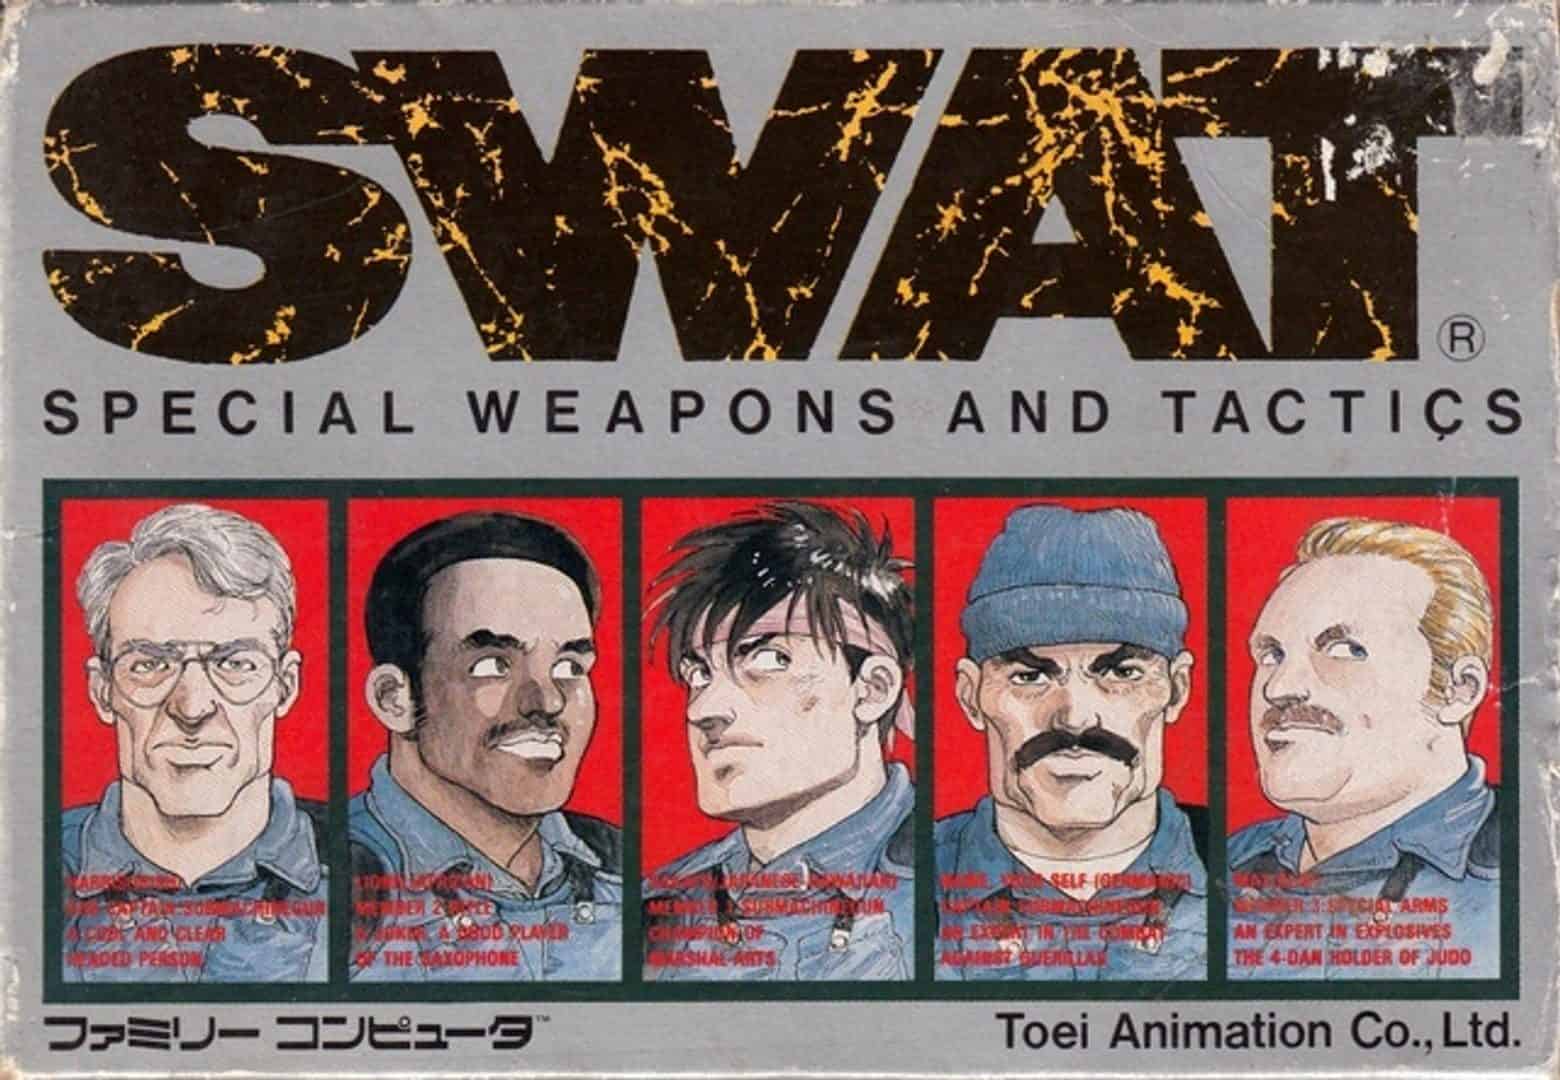 SWAT: Special Weapons and Tactics